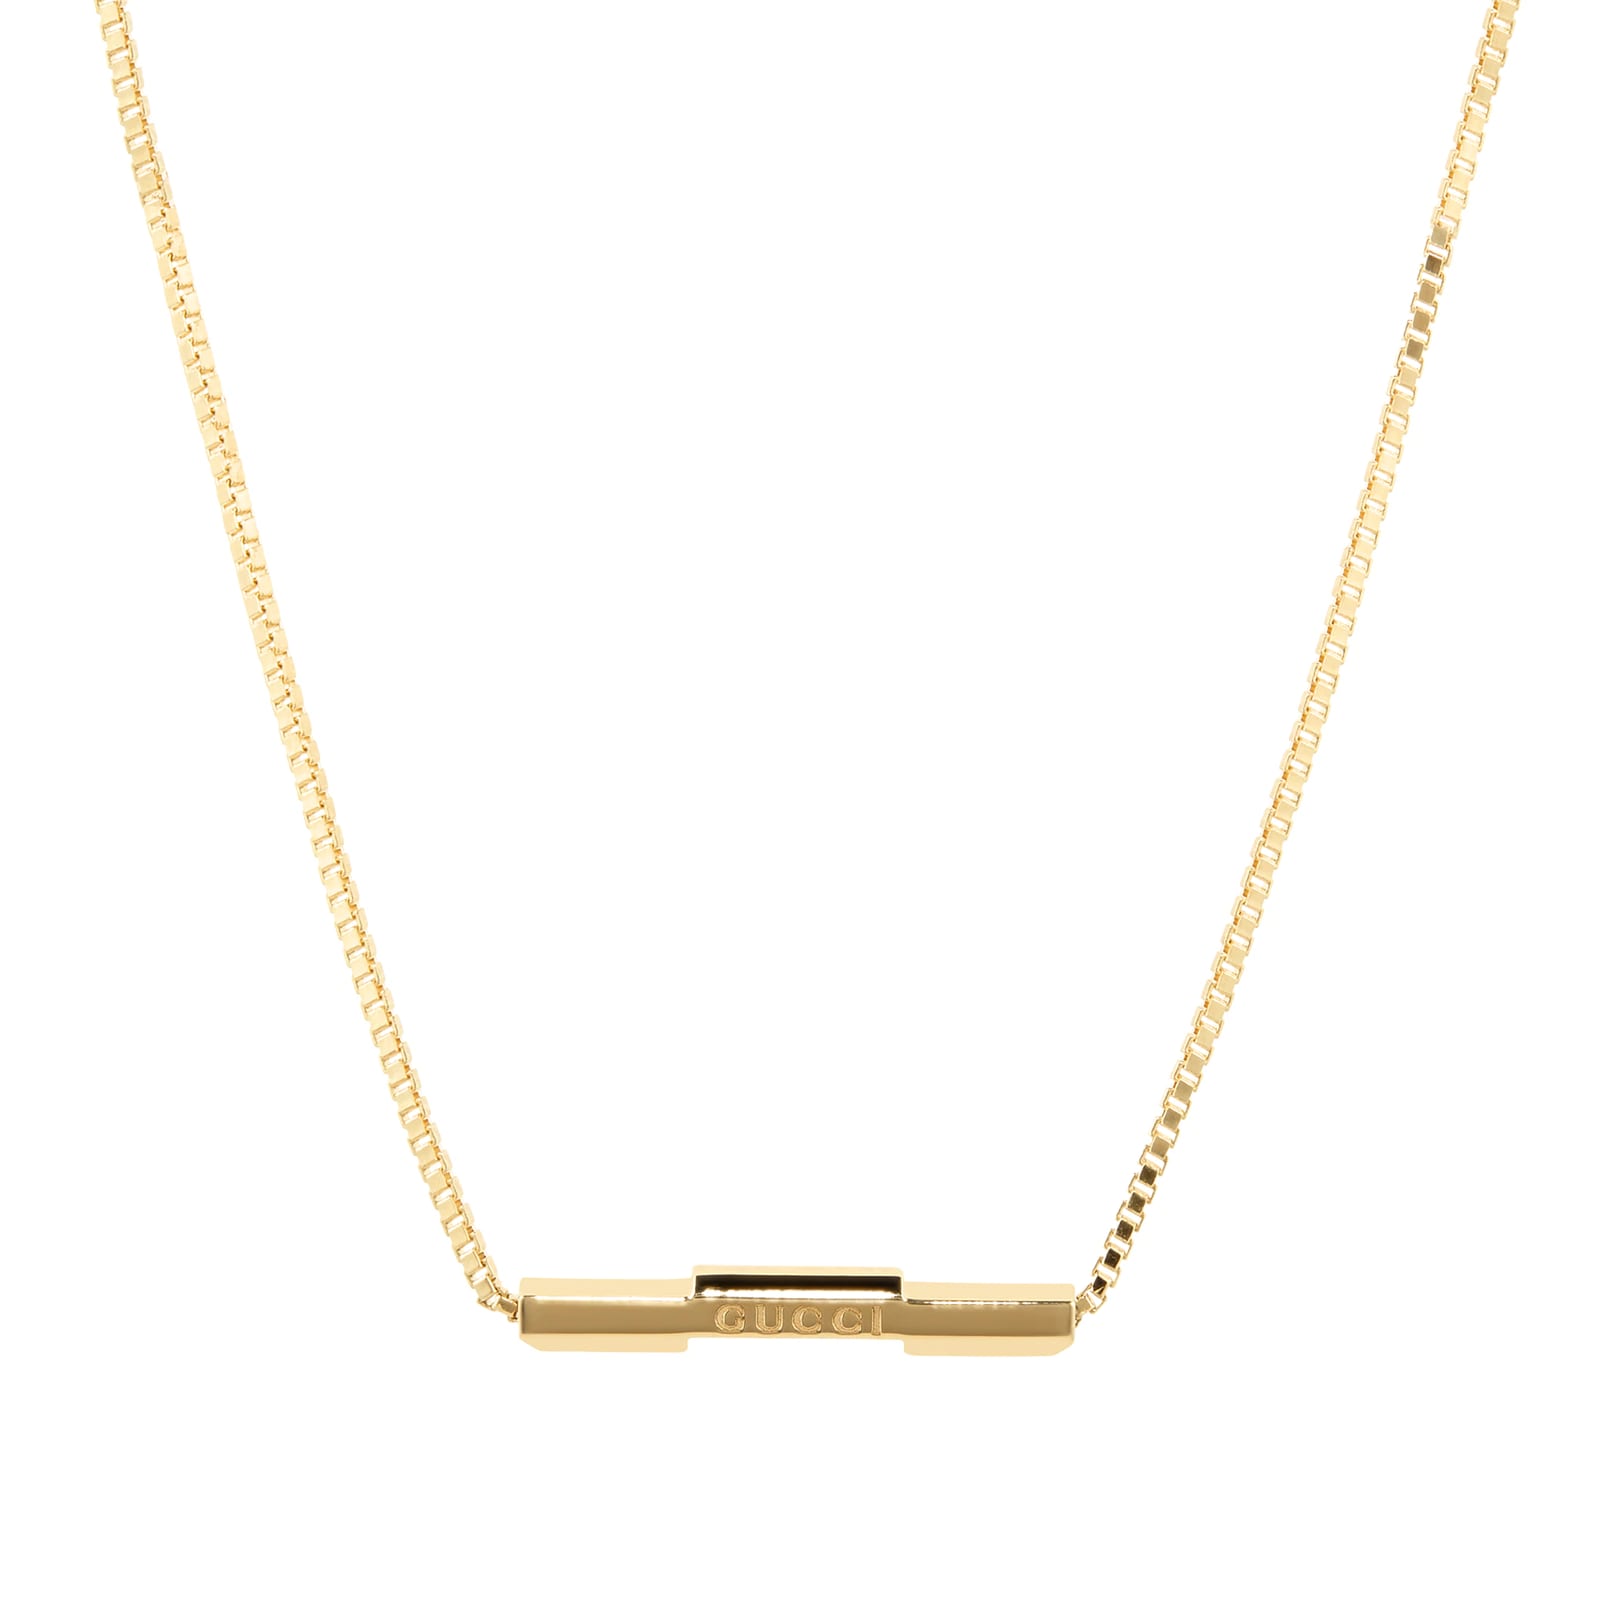 Gucci 18ct Yellow Gold Gucci Link to Love Necklace YBB66210800100U ...